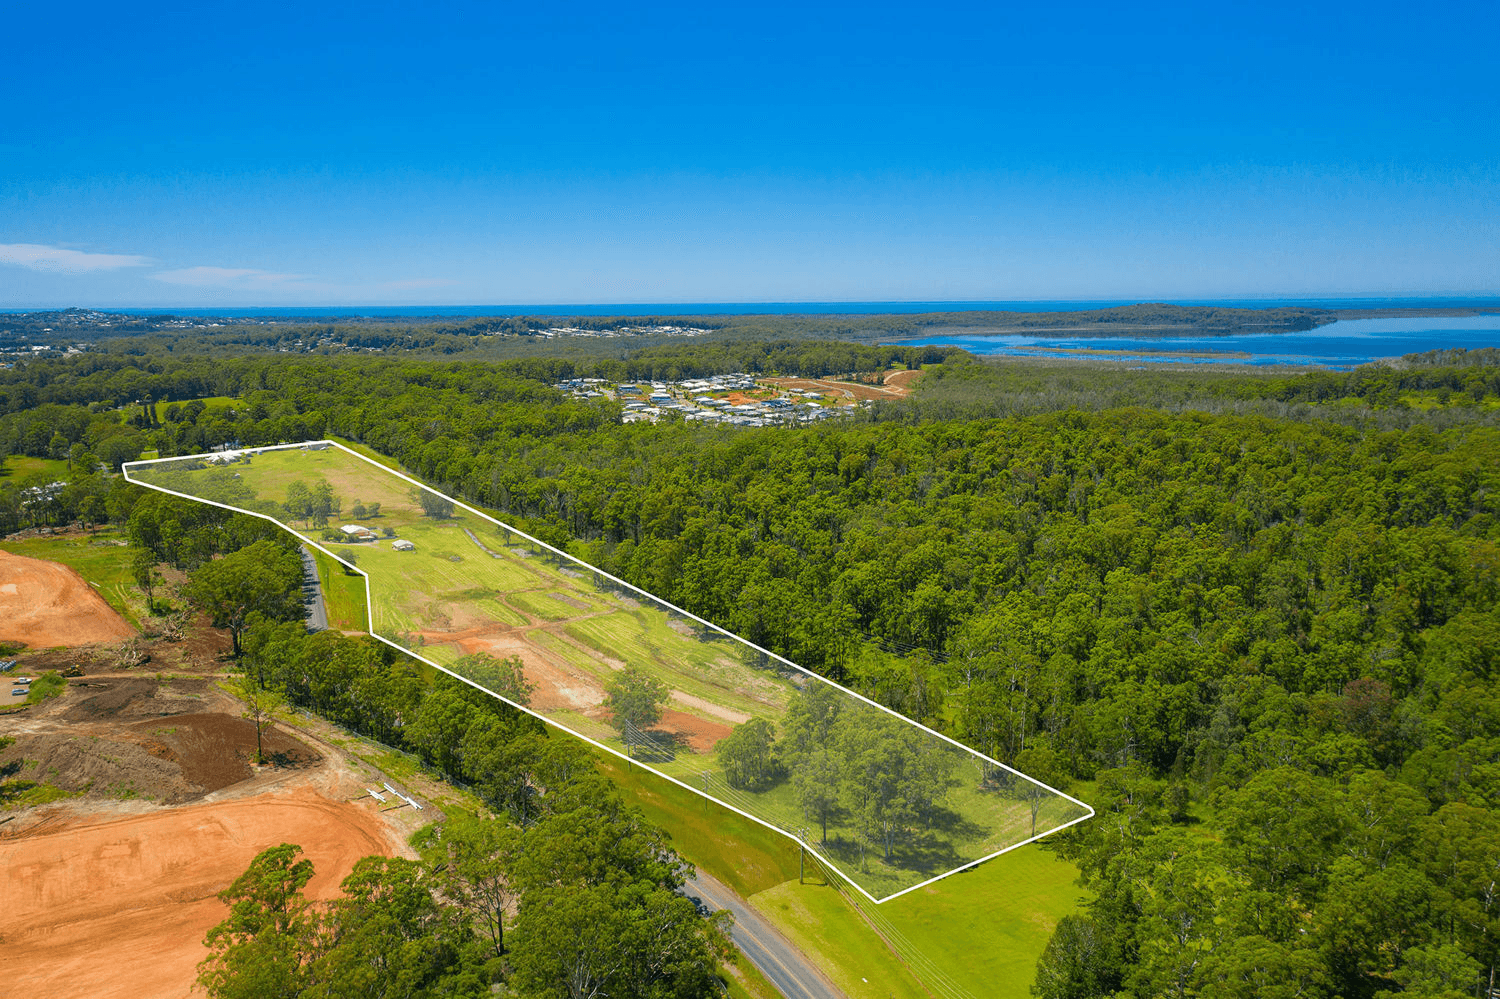 Lot 38 Timberline Estate, 293-329 John Oxley Drive, THRUMSTER, NSW 2444